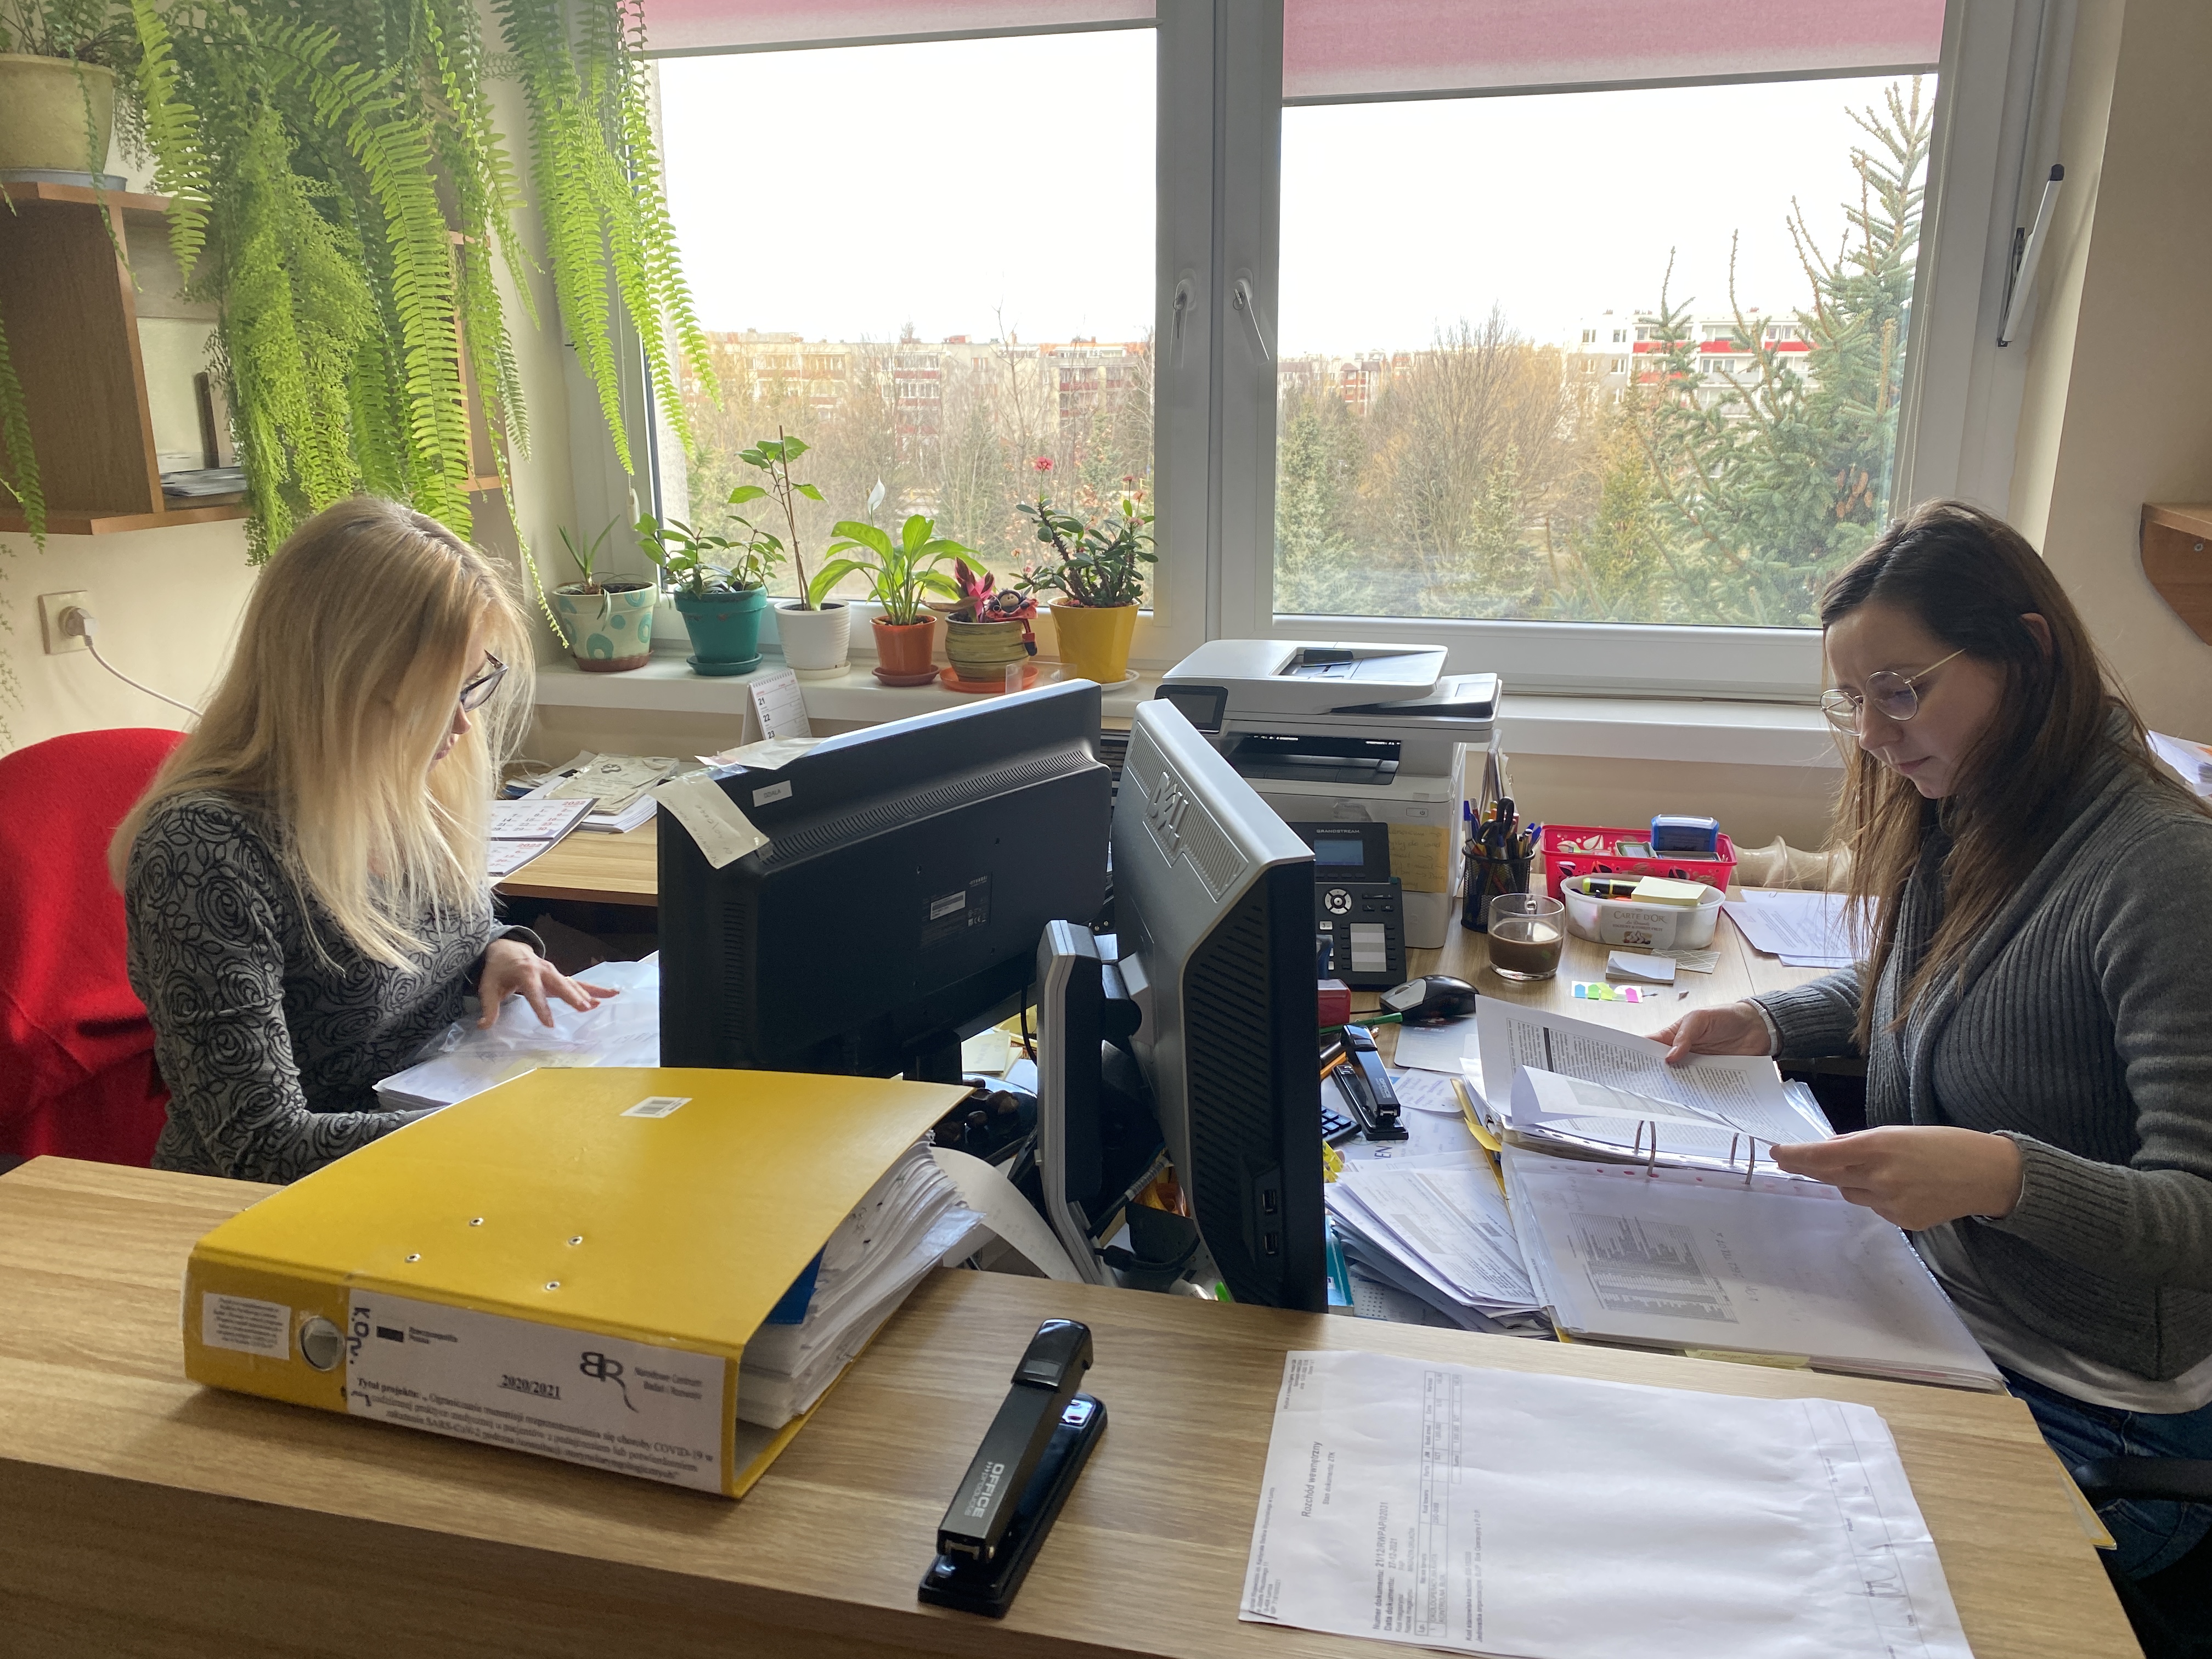 Financial settlement of the project, administrative employees of the accounting department, from the left: Anna Chludzińska, Marlena Wierzbowska